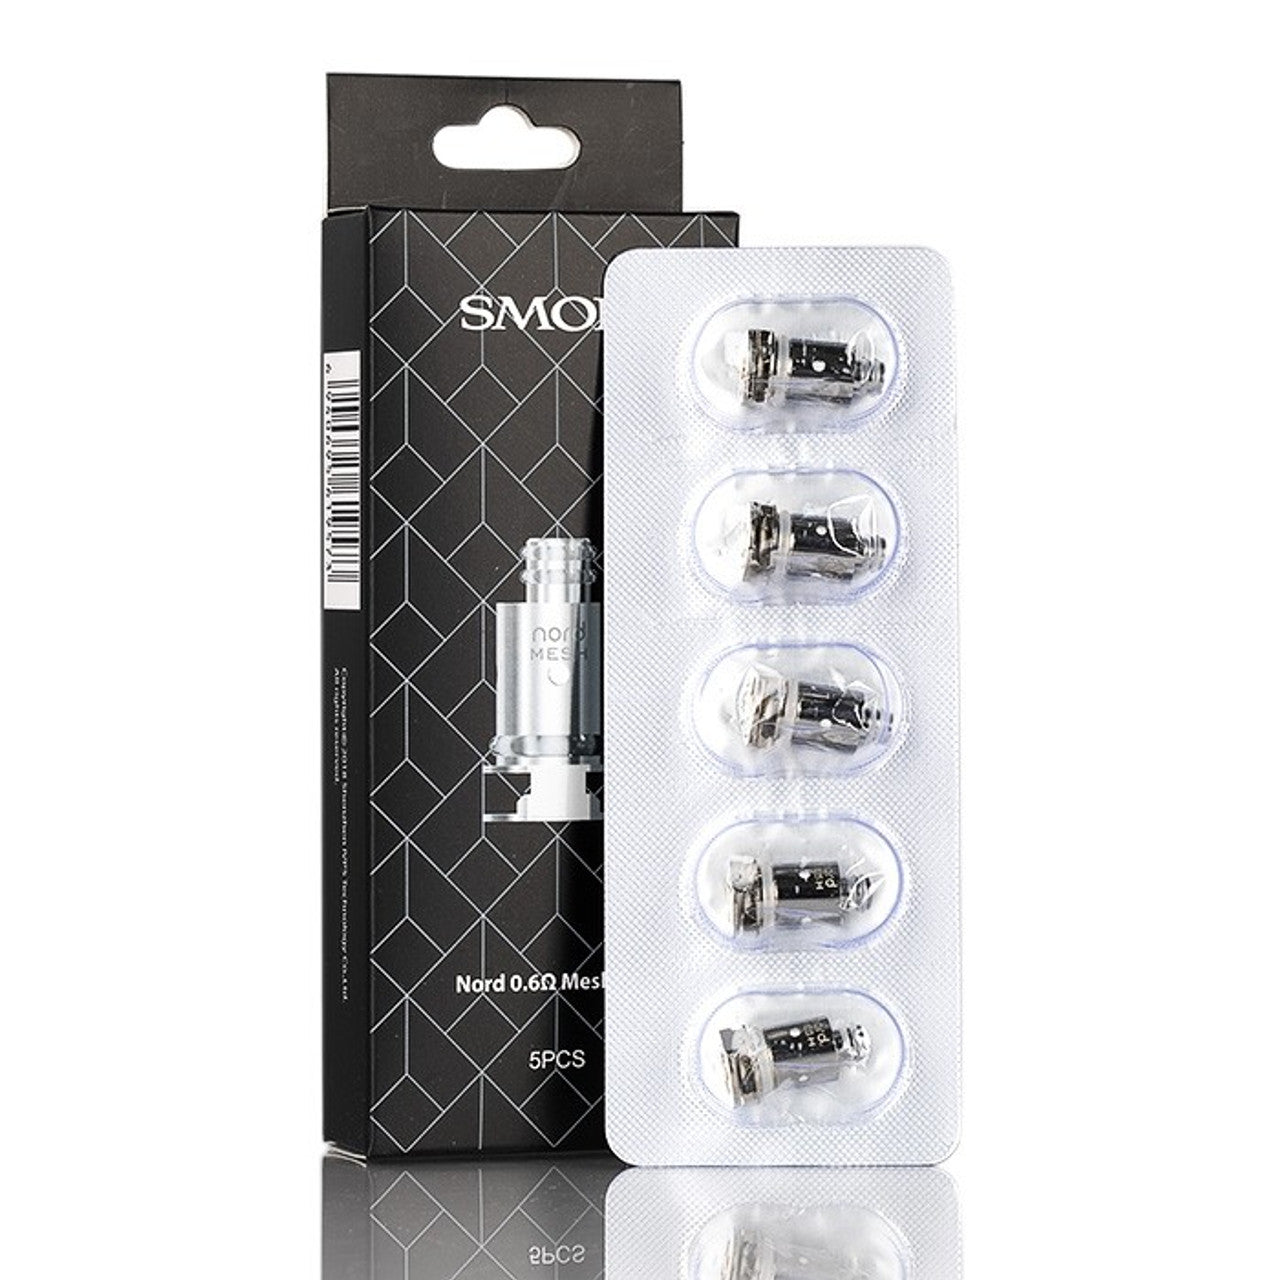 Smok - Nord Meshed 0.6Ω - Coils (Box of 5) - MK Distro